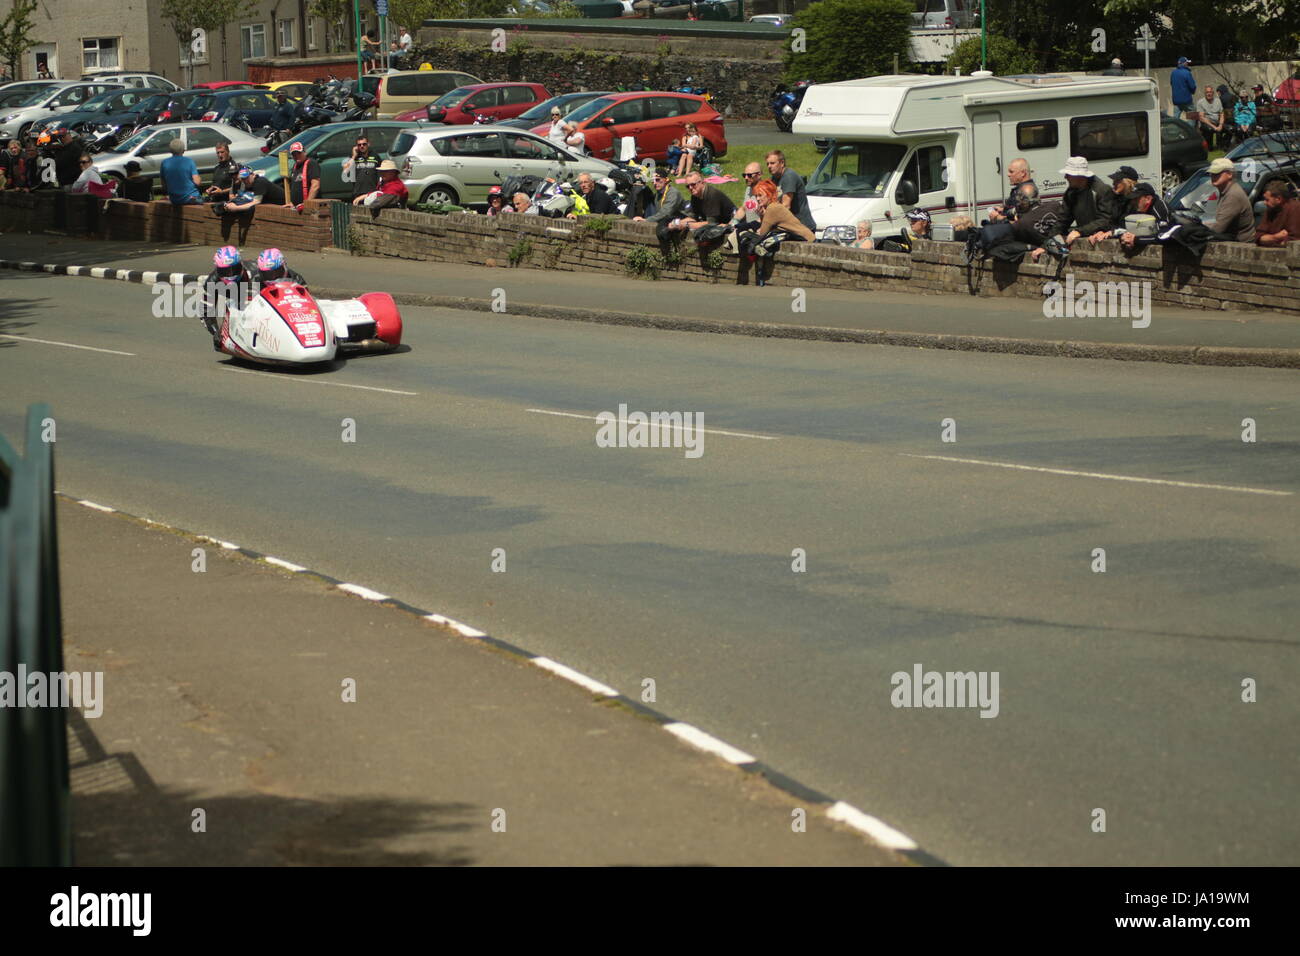 Isle of Man TT Races, Sidecar Qualifying Practice Race, Saturday 3 June 2017. Sidecar qualifying session. Number 39, privateers Craig Melvin and Stuart Christian on a 600cc LCR Suzuki from Onchan, Isle of Man. Credit: Eclectic Art and Photography/Alamy Live News Stock Photo